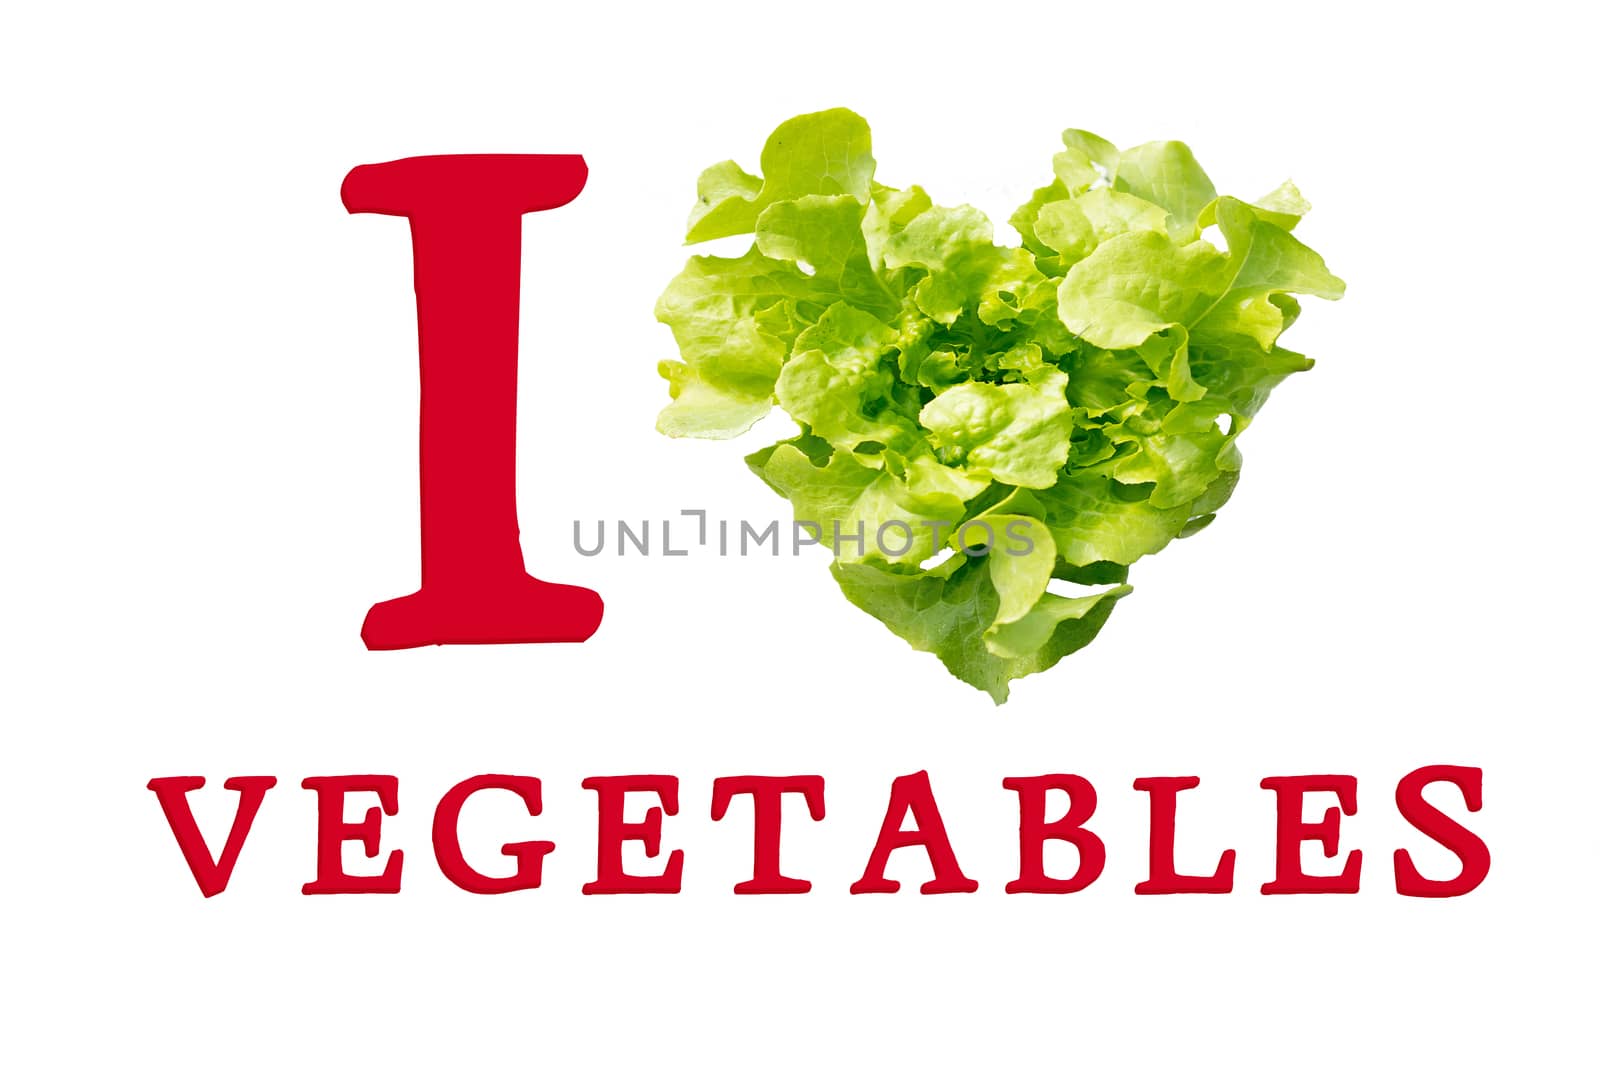 I love vegetables. Heart symbol. Vegetables diet concept. Food photography of heart made from vegetables isolated white background. High resolution product